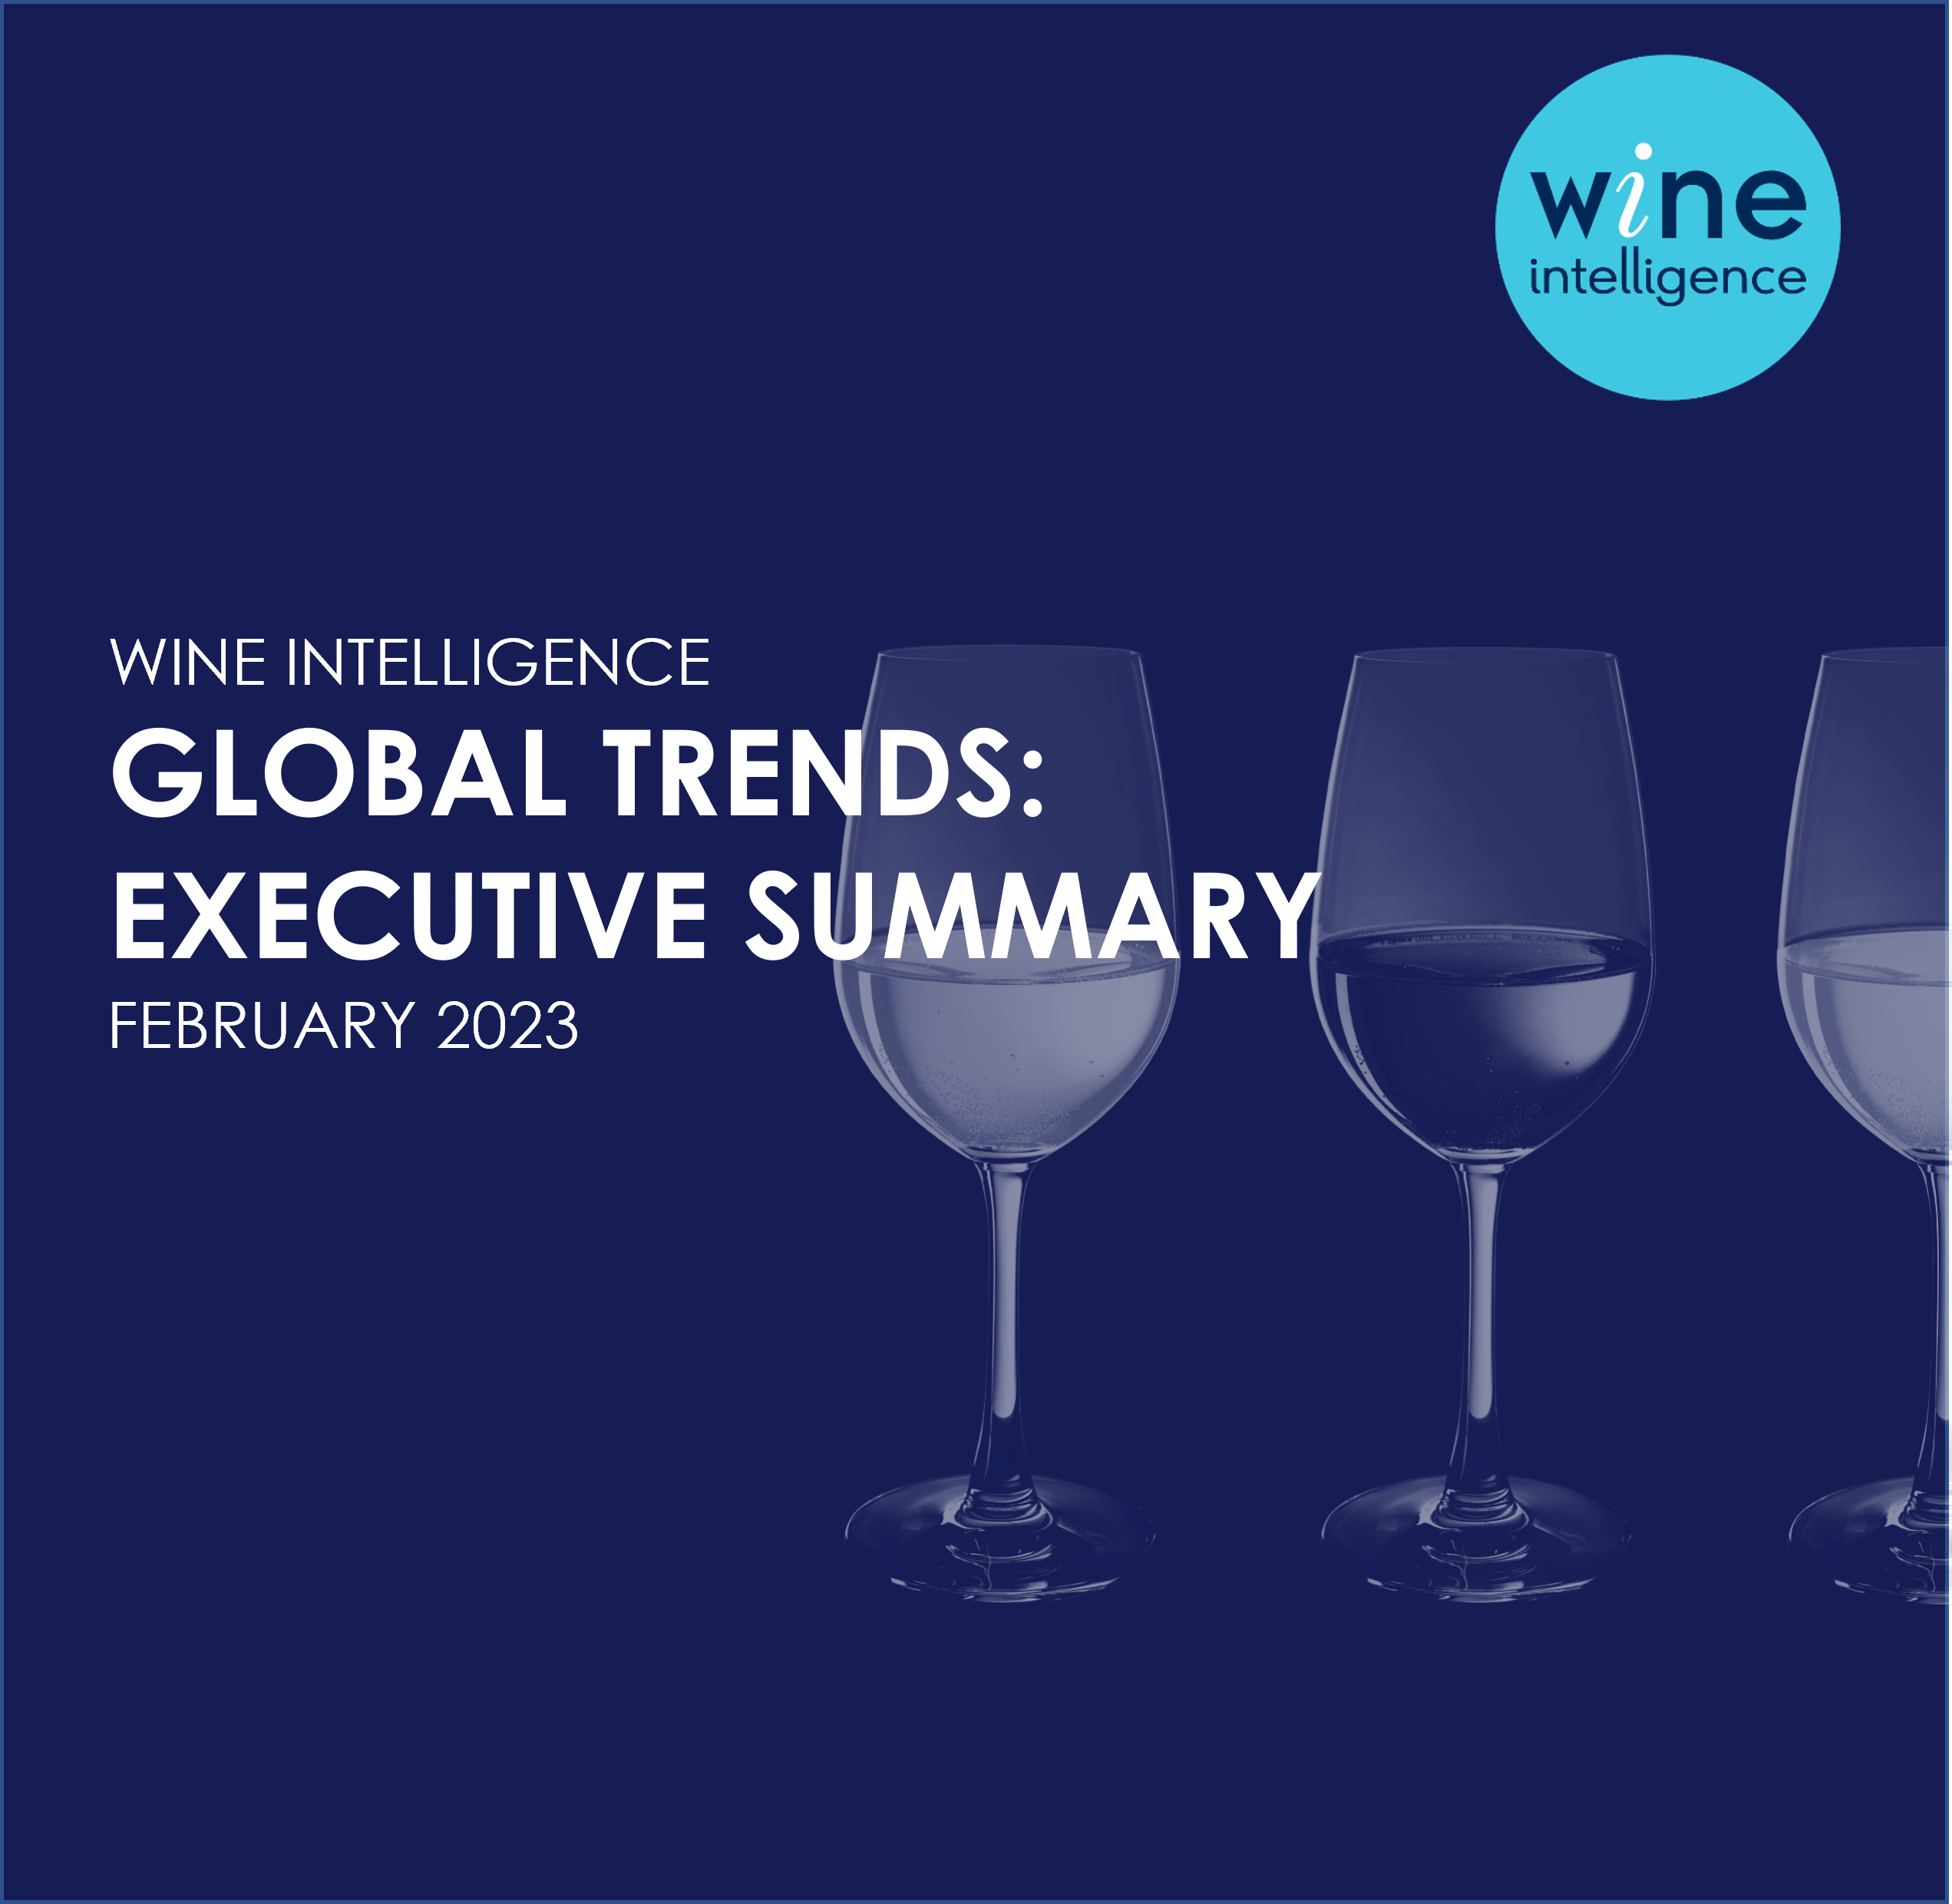 Global Trends Execuitve Summary 2022 - Special Interest Reports